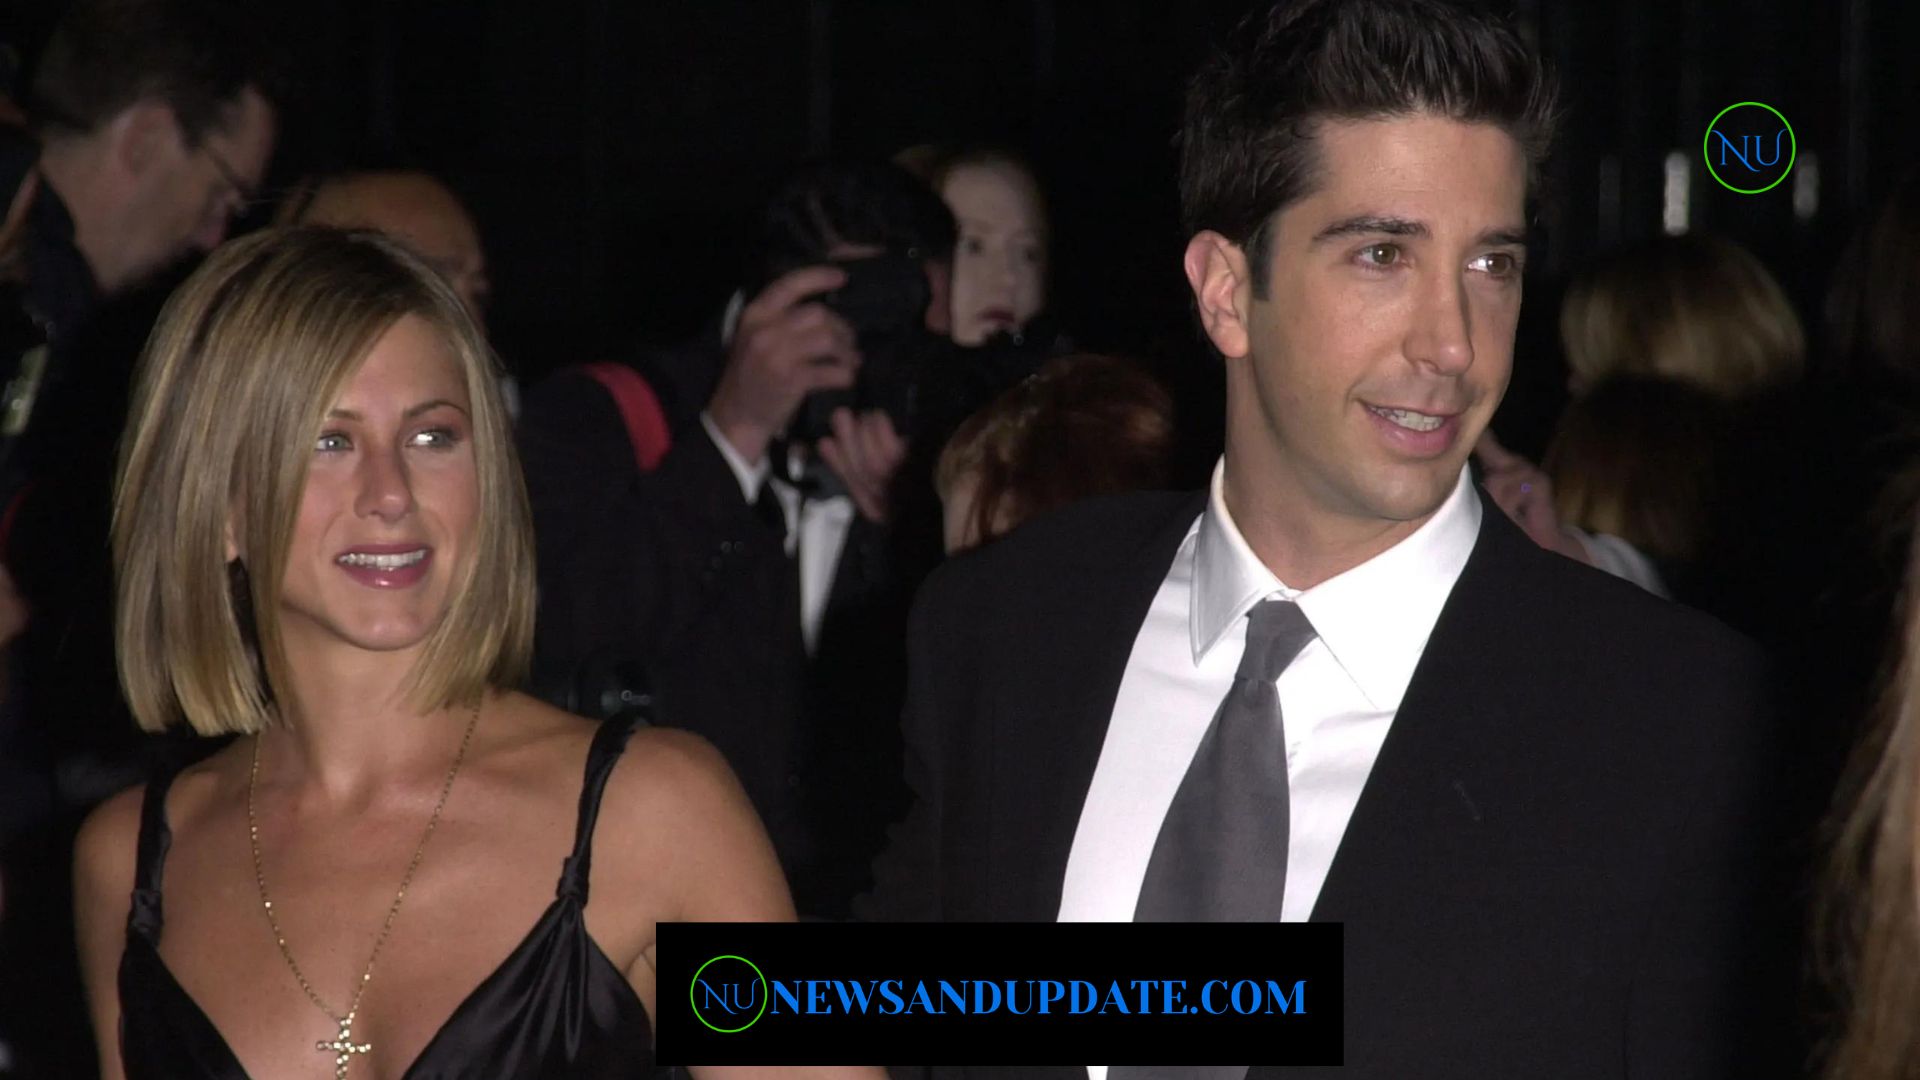 Are David Schwimmer And Jennifer Aniston Dating? Did They Date Secretly in 2021?